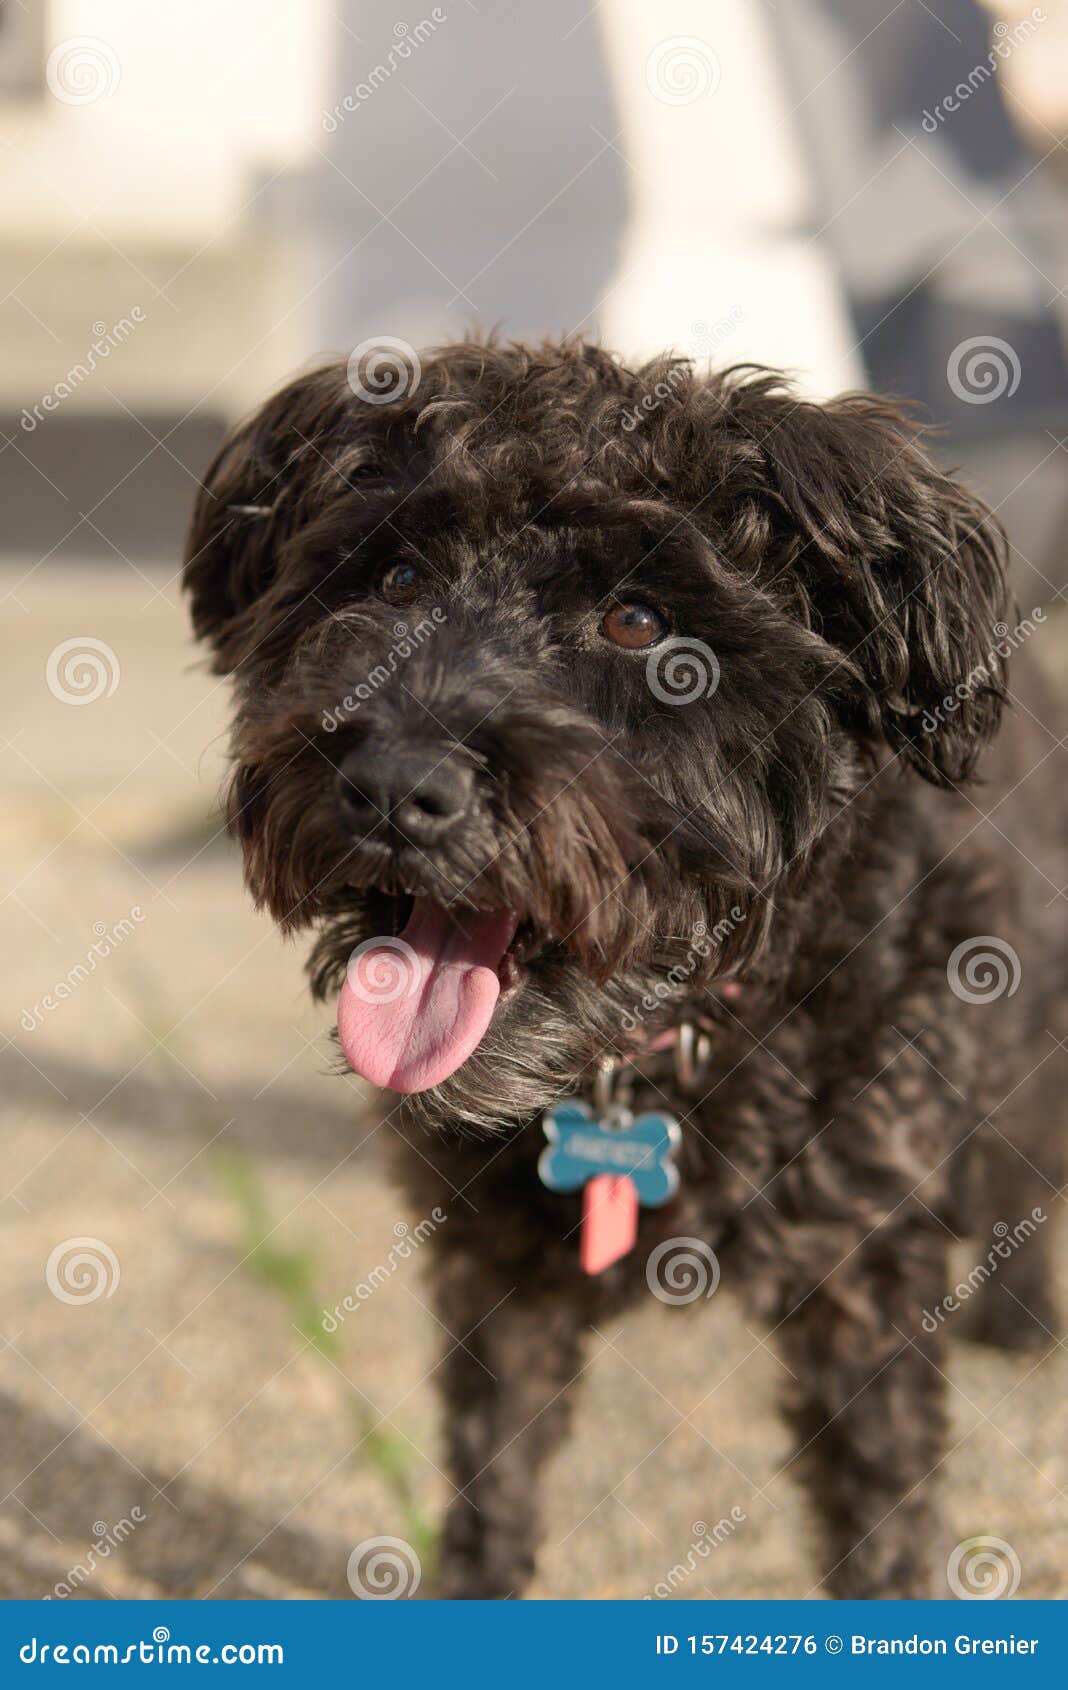 Schnoodle Dog Poodle Mix Outside Stock Photo - Image of relaxing, filter:  157424276